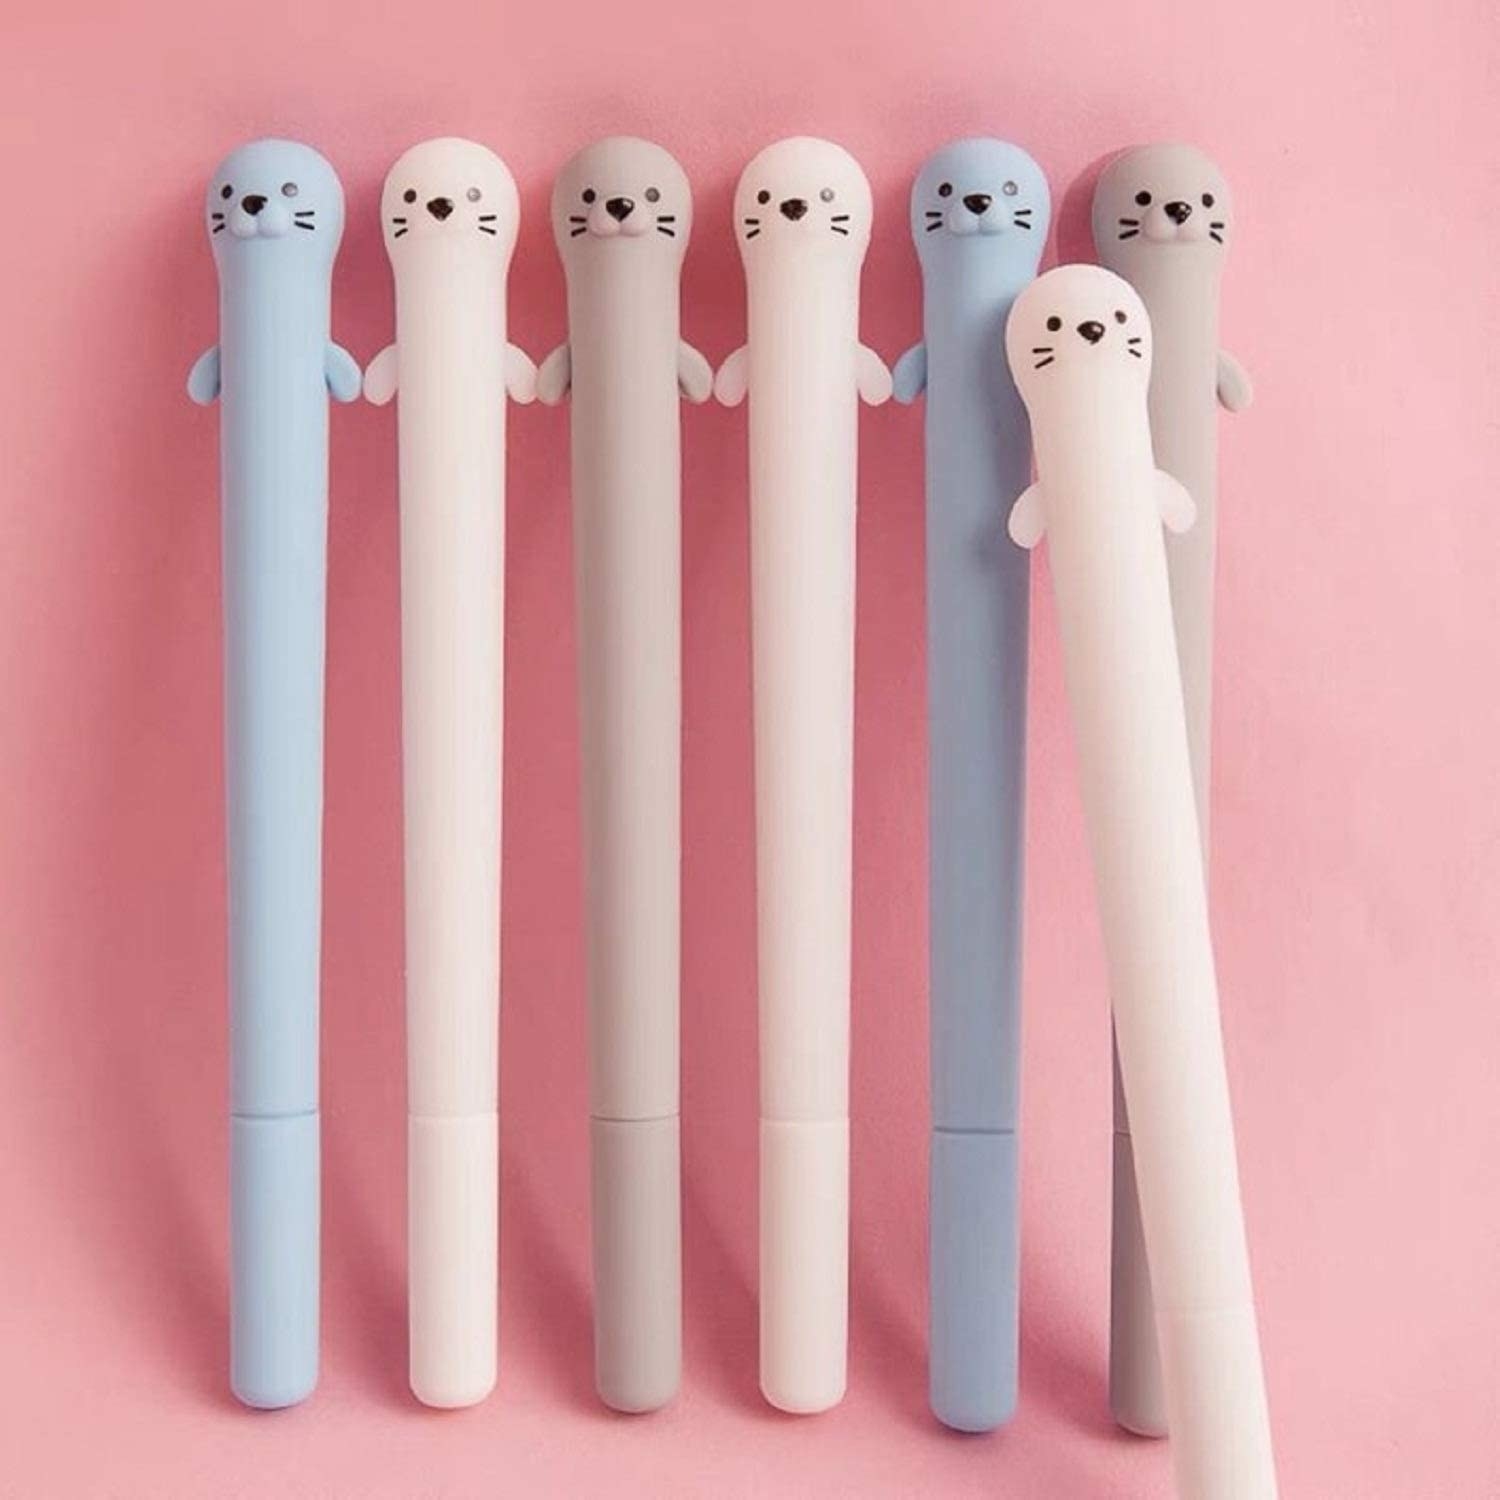 a set of seven pens with caps that look like cute otters